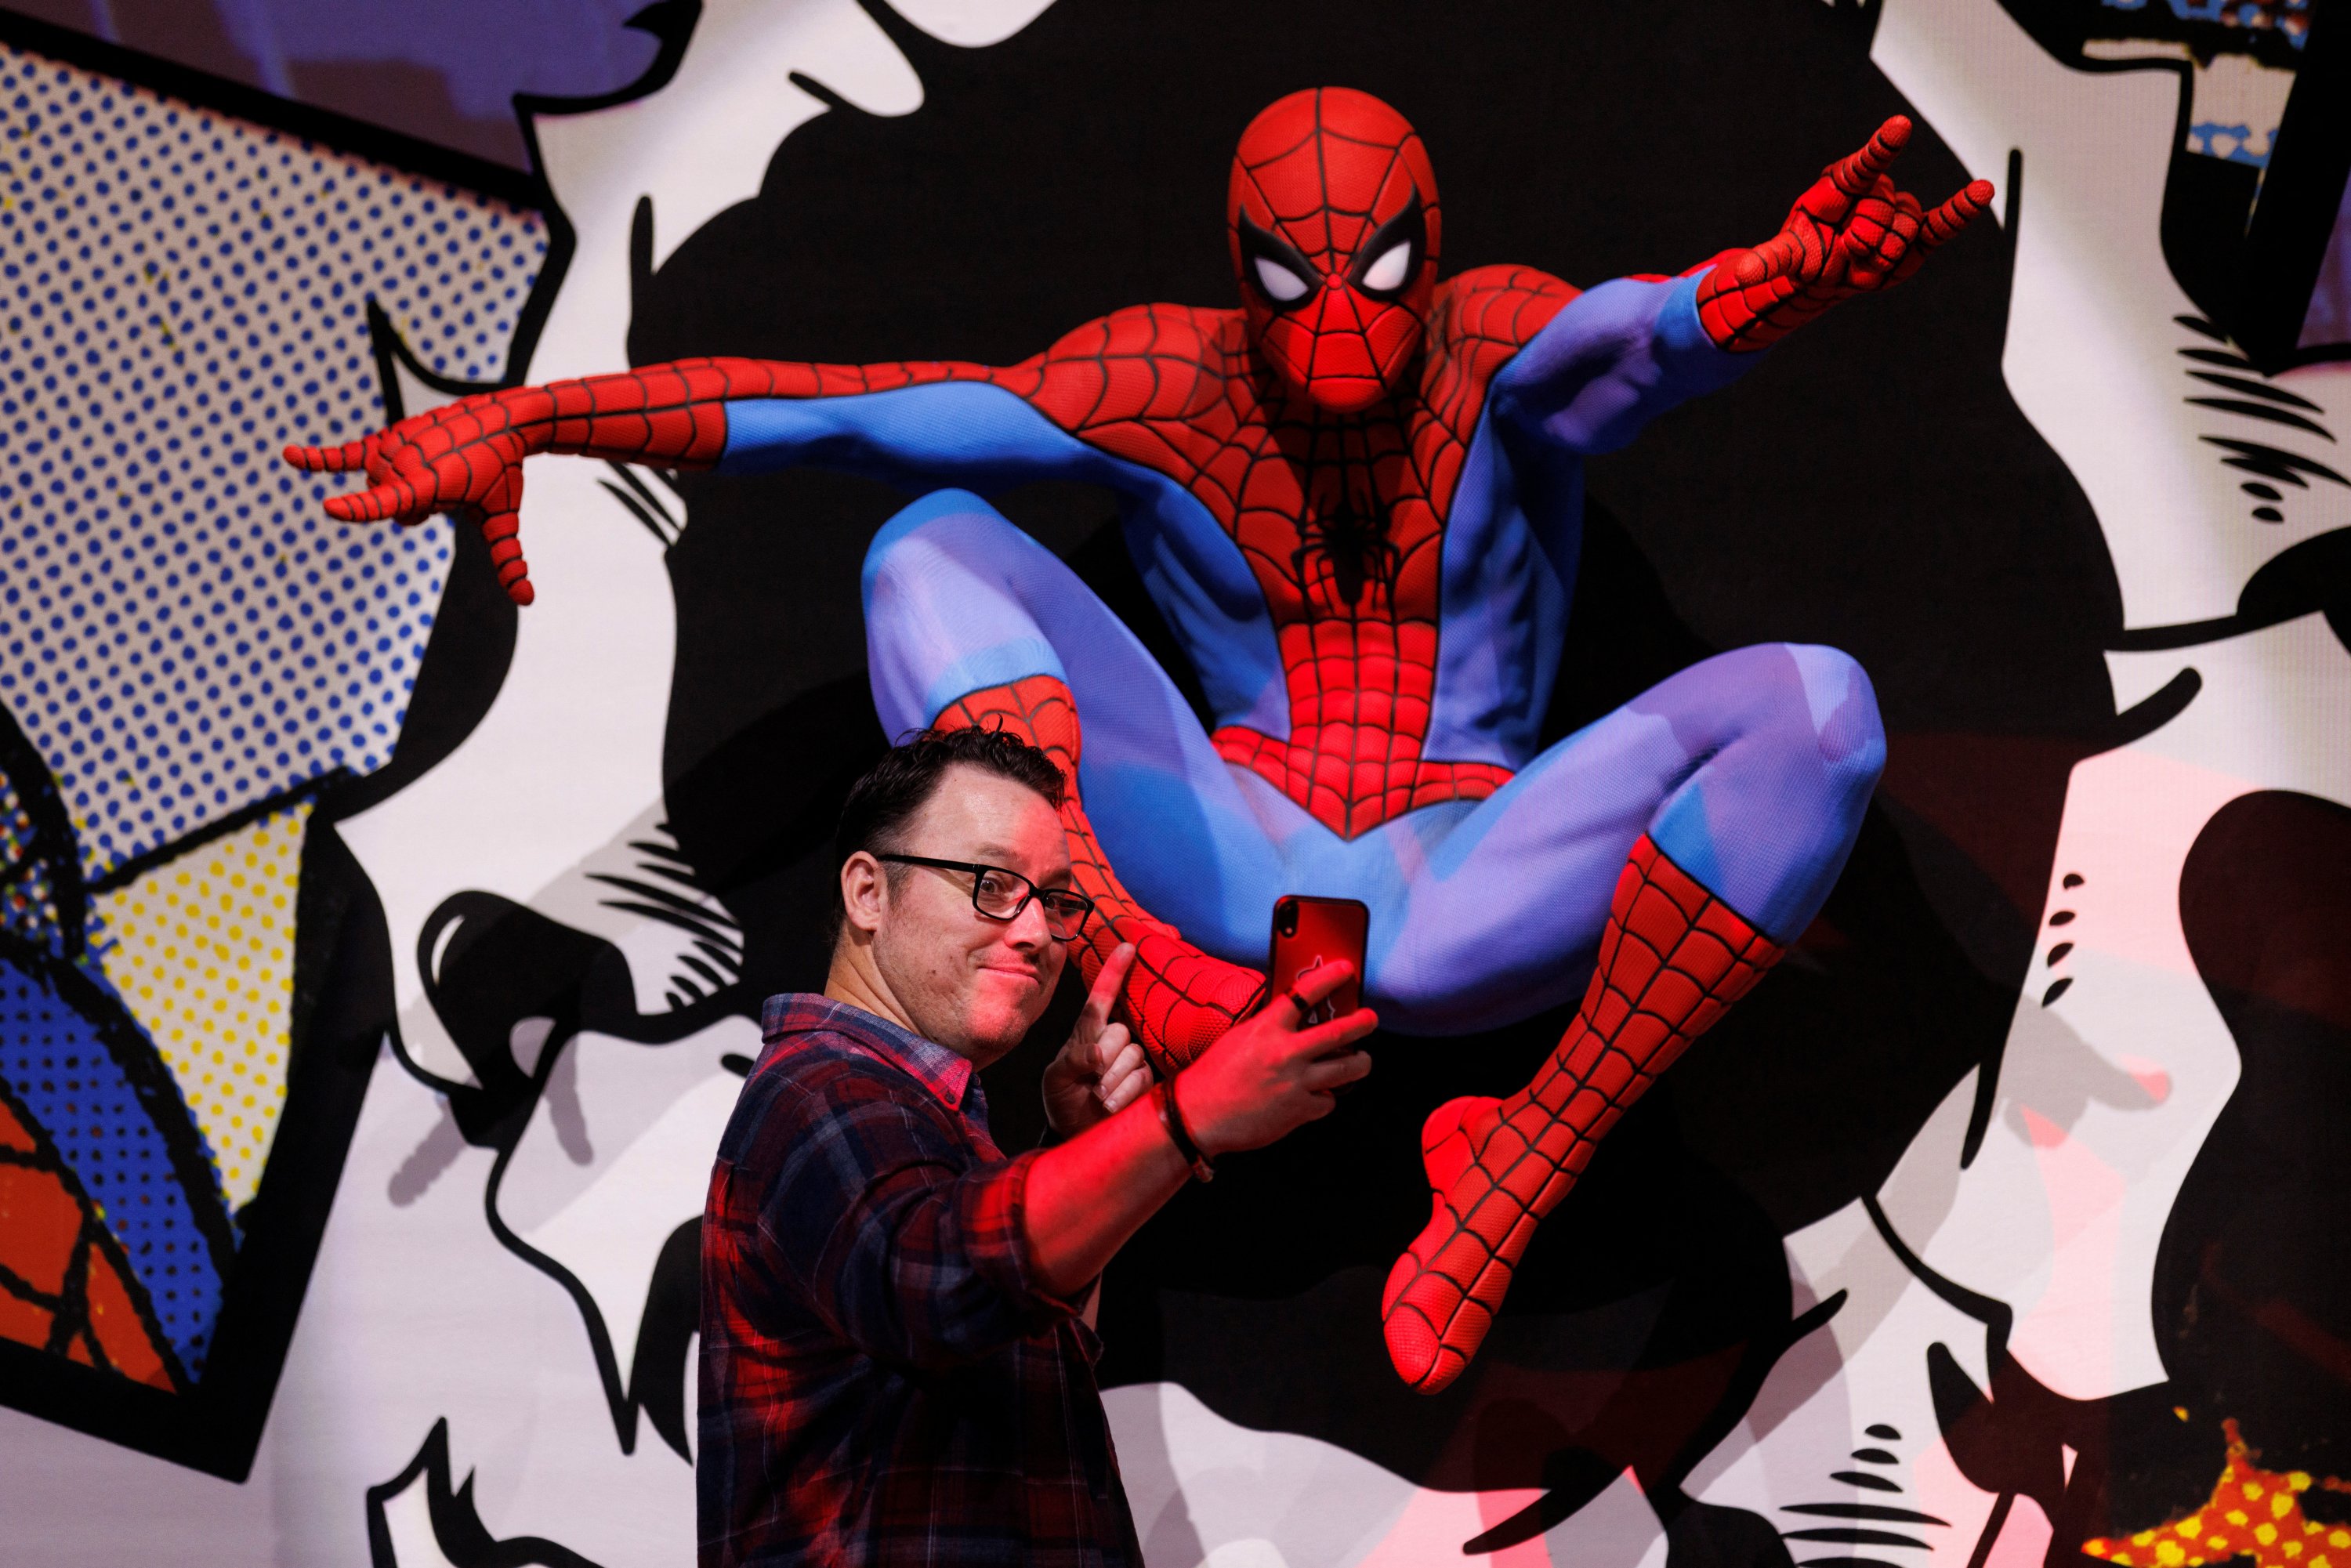 Brian Crosby takes a selfie as the Comic-Con Museum unveils the world-premiere exhibit of Marvel’s friendly neighborhood super hero Spiderman, in celebration of the character's 60th anniversary in San Diego, California, U.S., June 30, 2022. (REUTERS Photo)